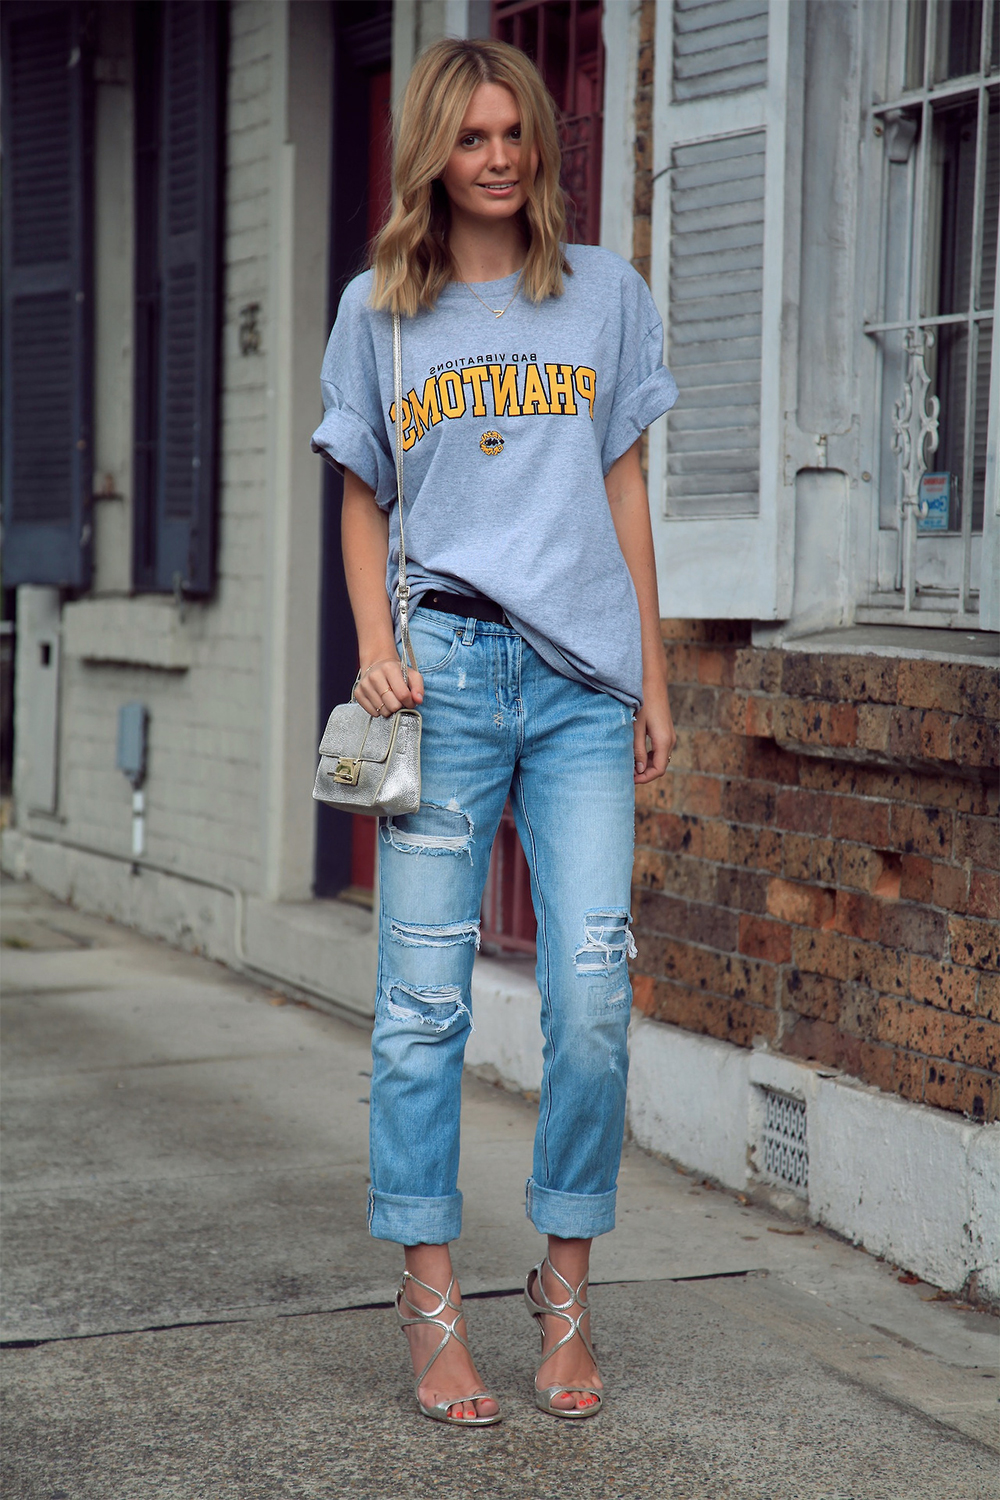 Oversized Tee Outfit Ideas - Outfitmag.com